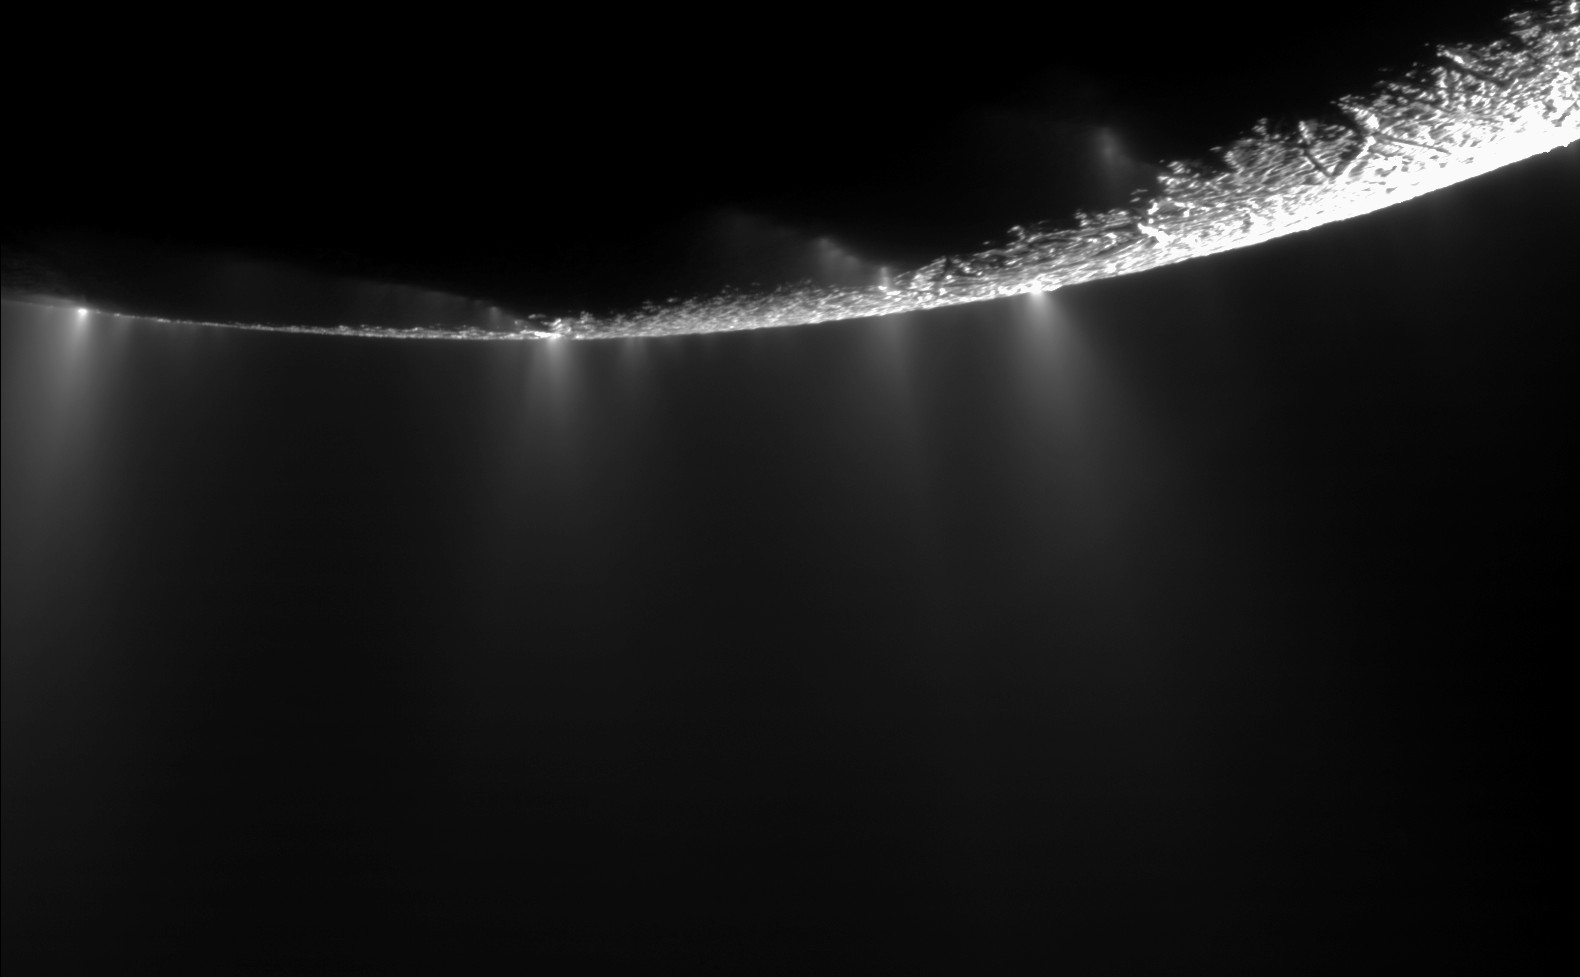 The water vapor plumes of Enceladus, erupting from huge fissures at the south pole. Image Credit: NASA/JPL-Caltech